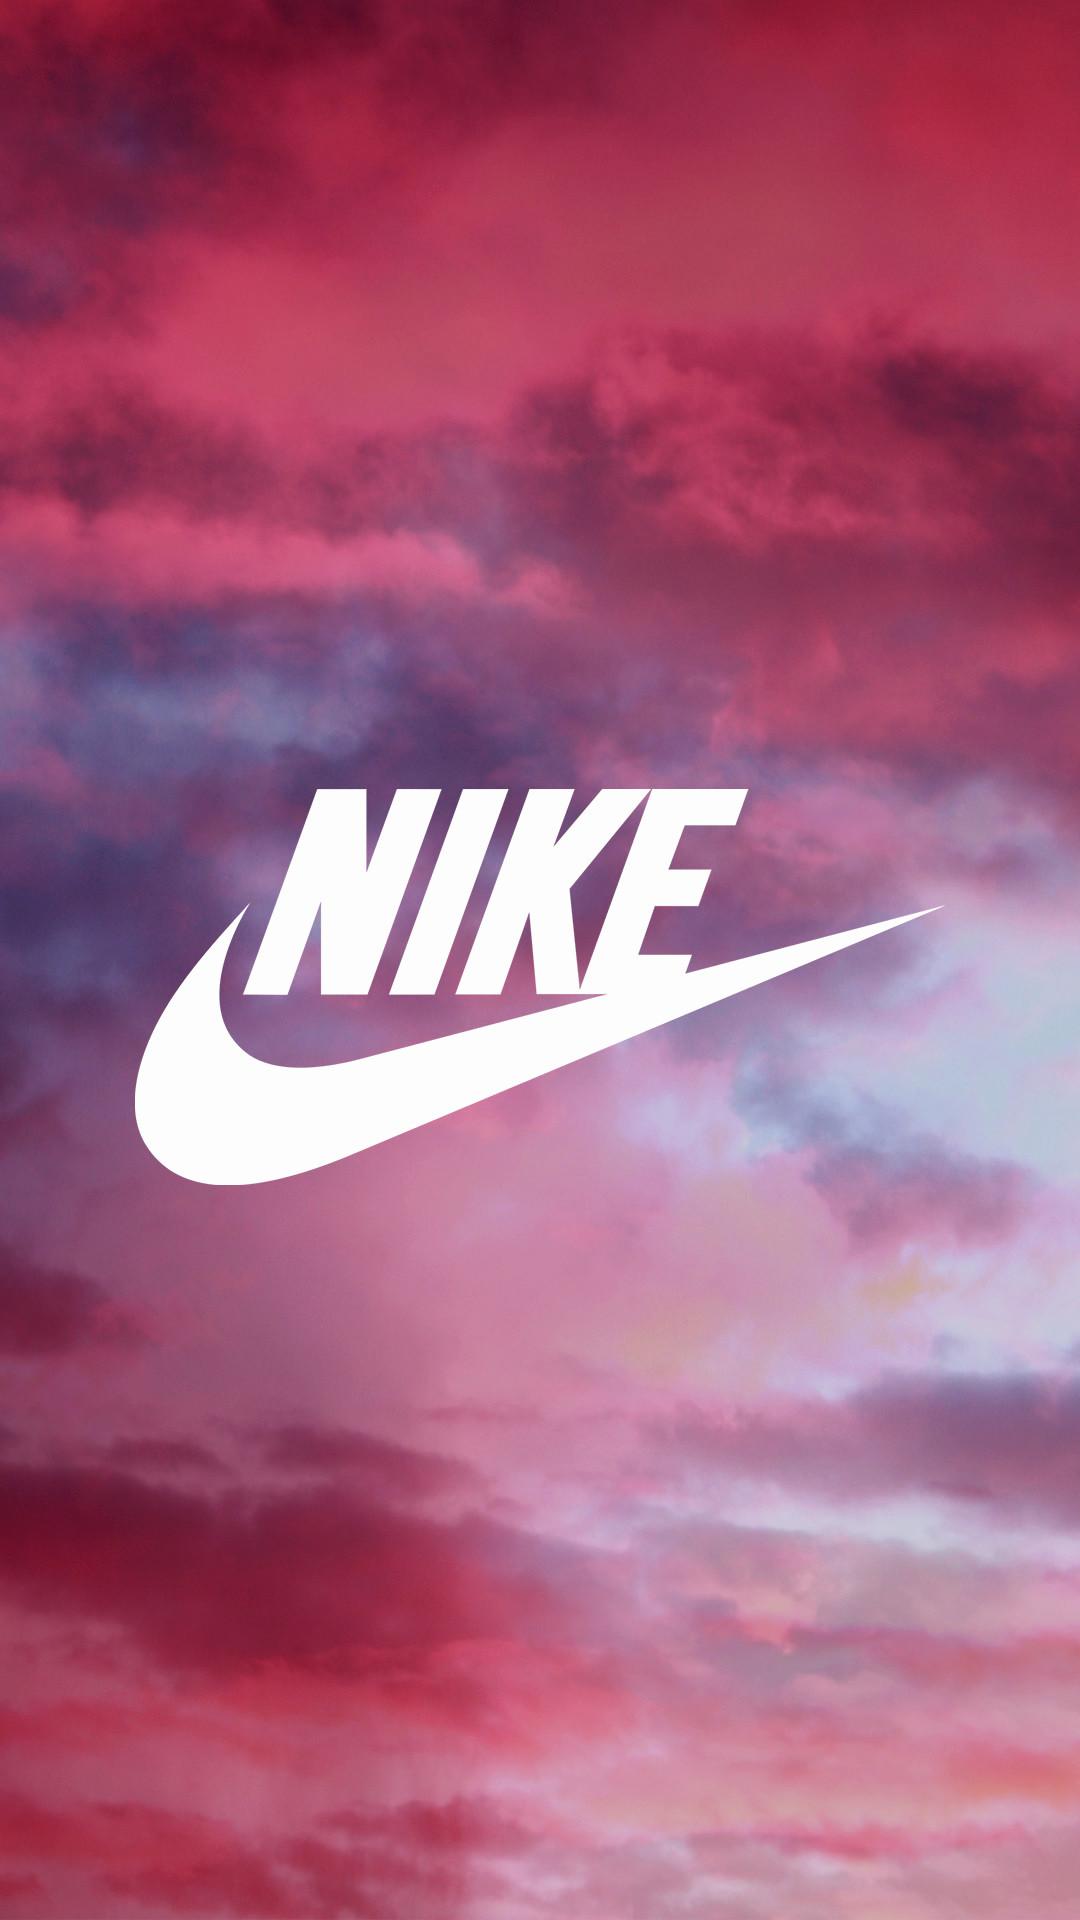 Girly Nike Wallpapers - Top Free Girly